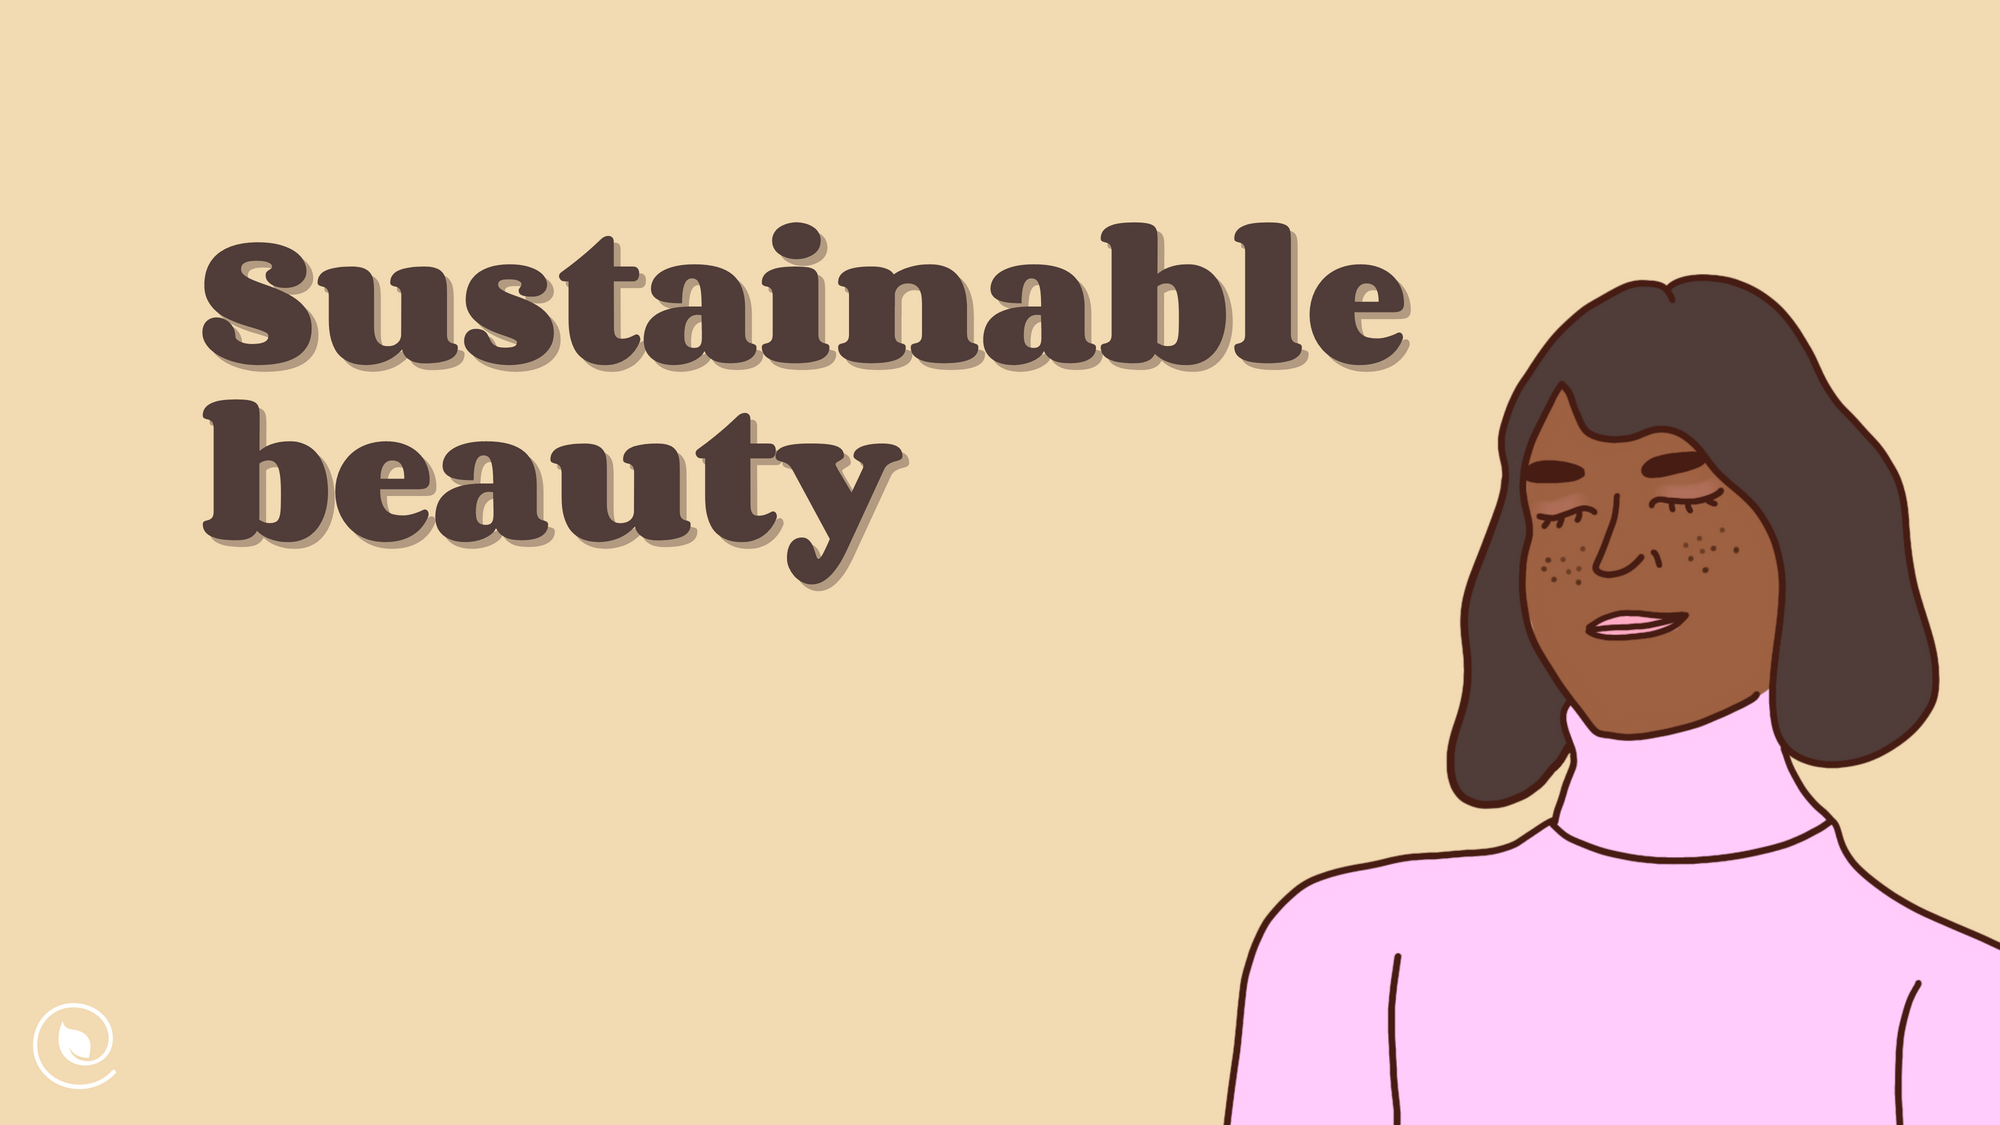 Why sustainable beauty? | Ecosophist